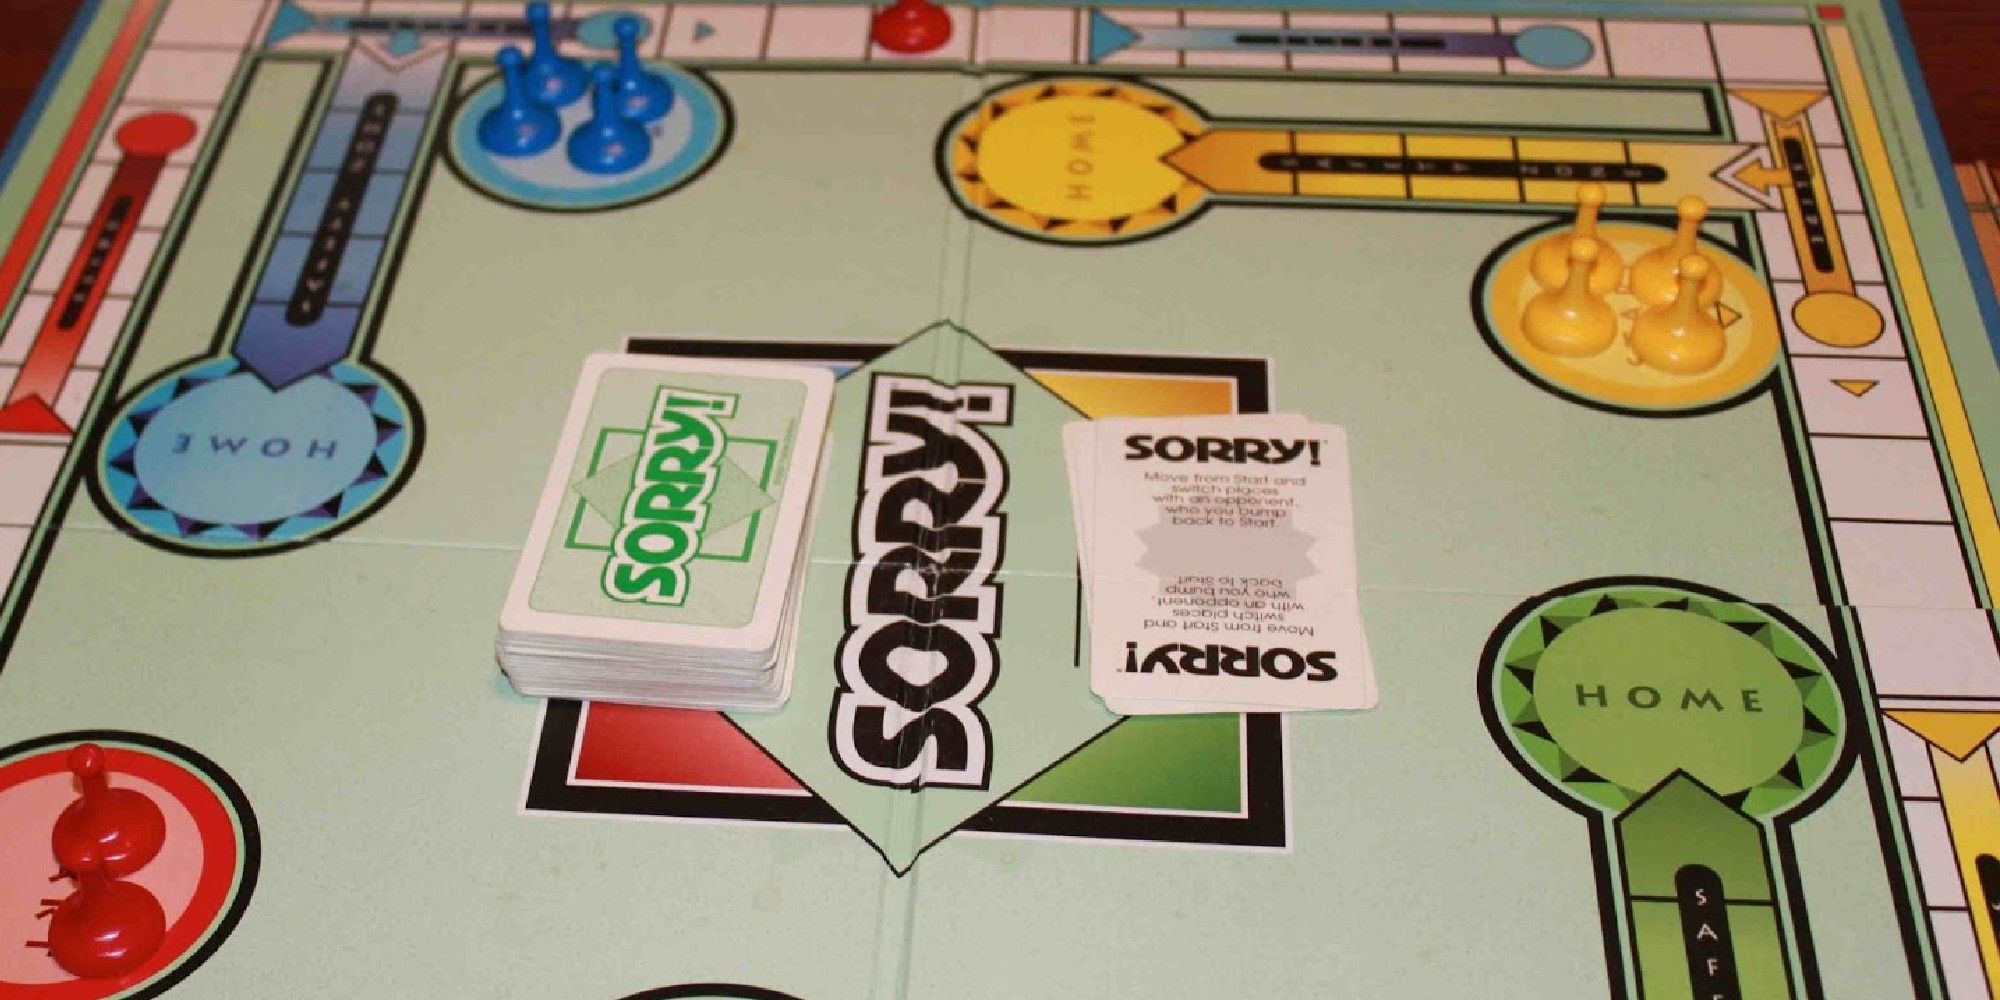 The Sorry! Board And Pieces